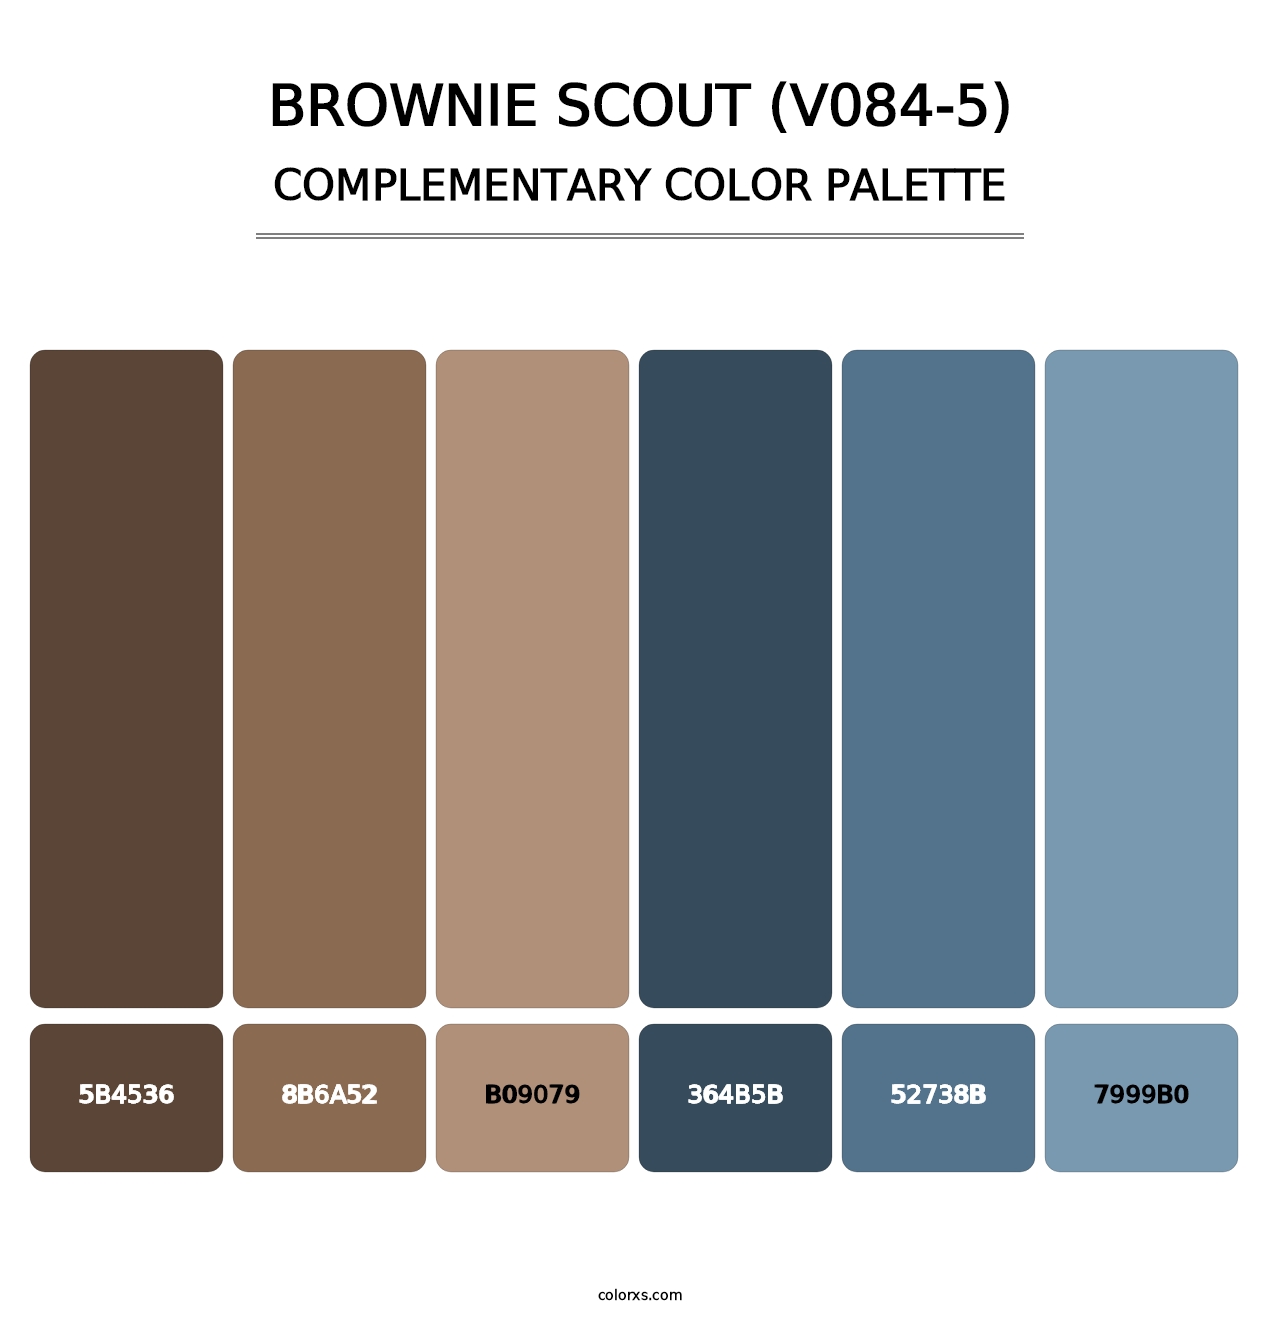 Brownie Scout (V084-5) - Complementary Color Palette